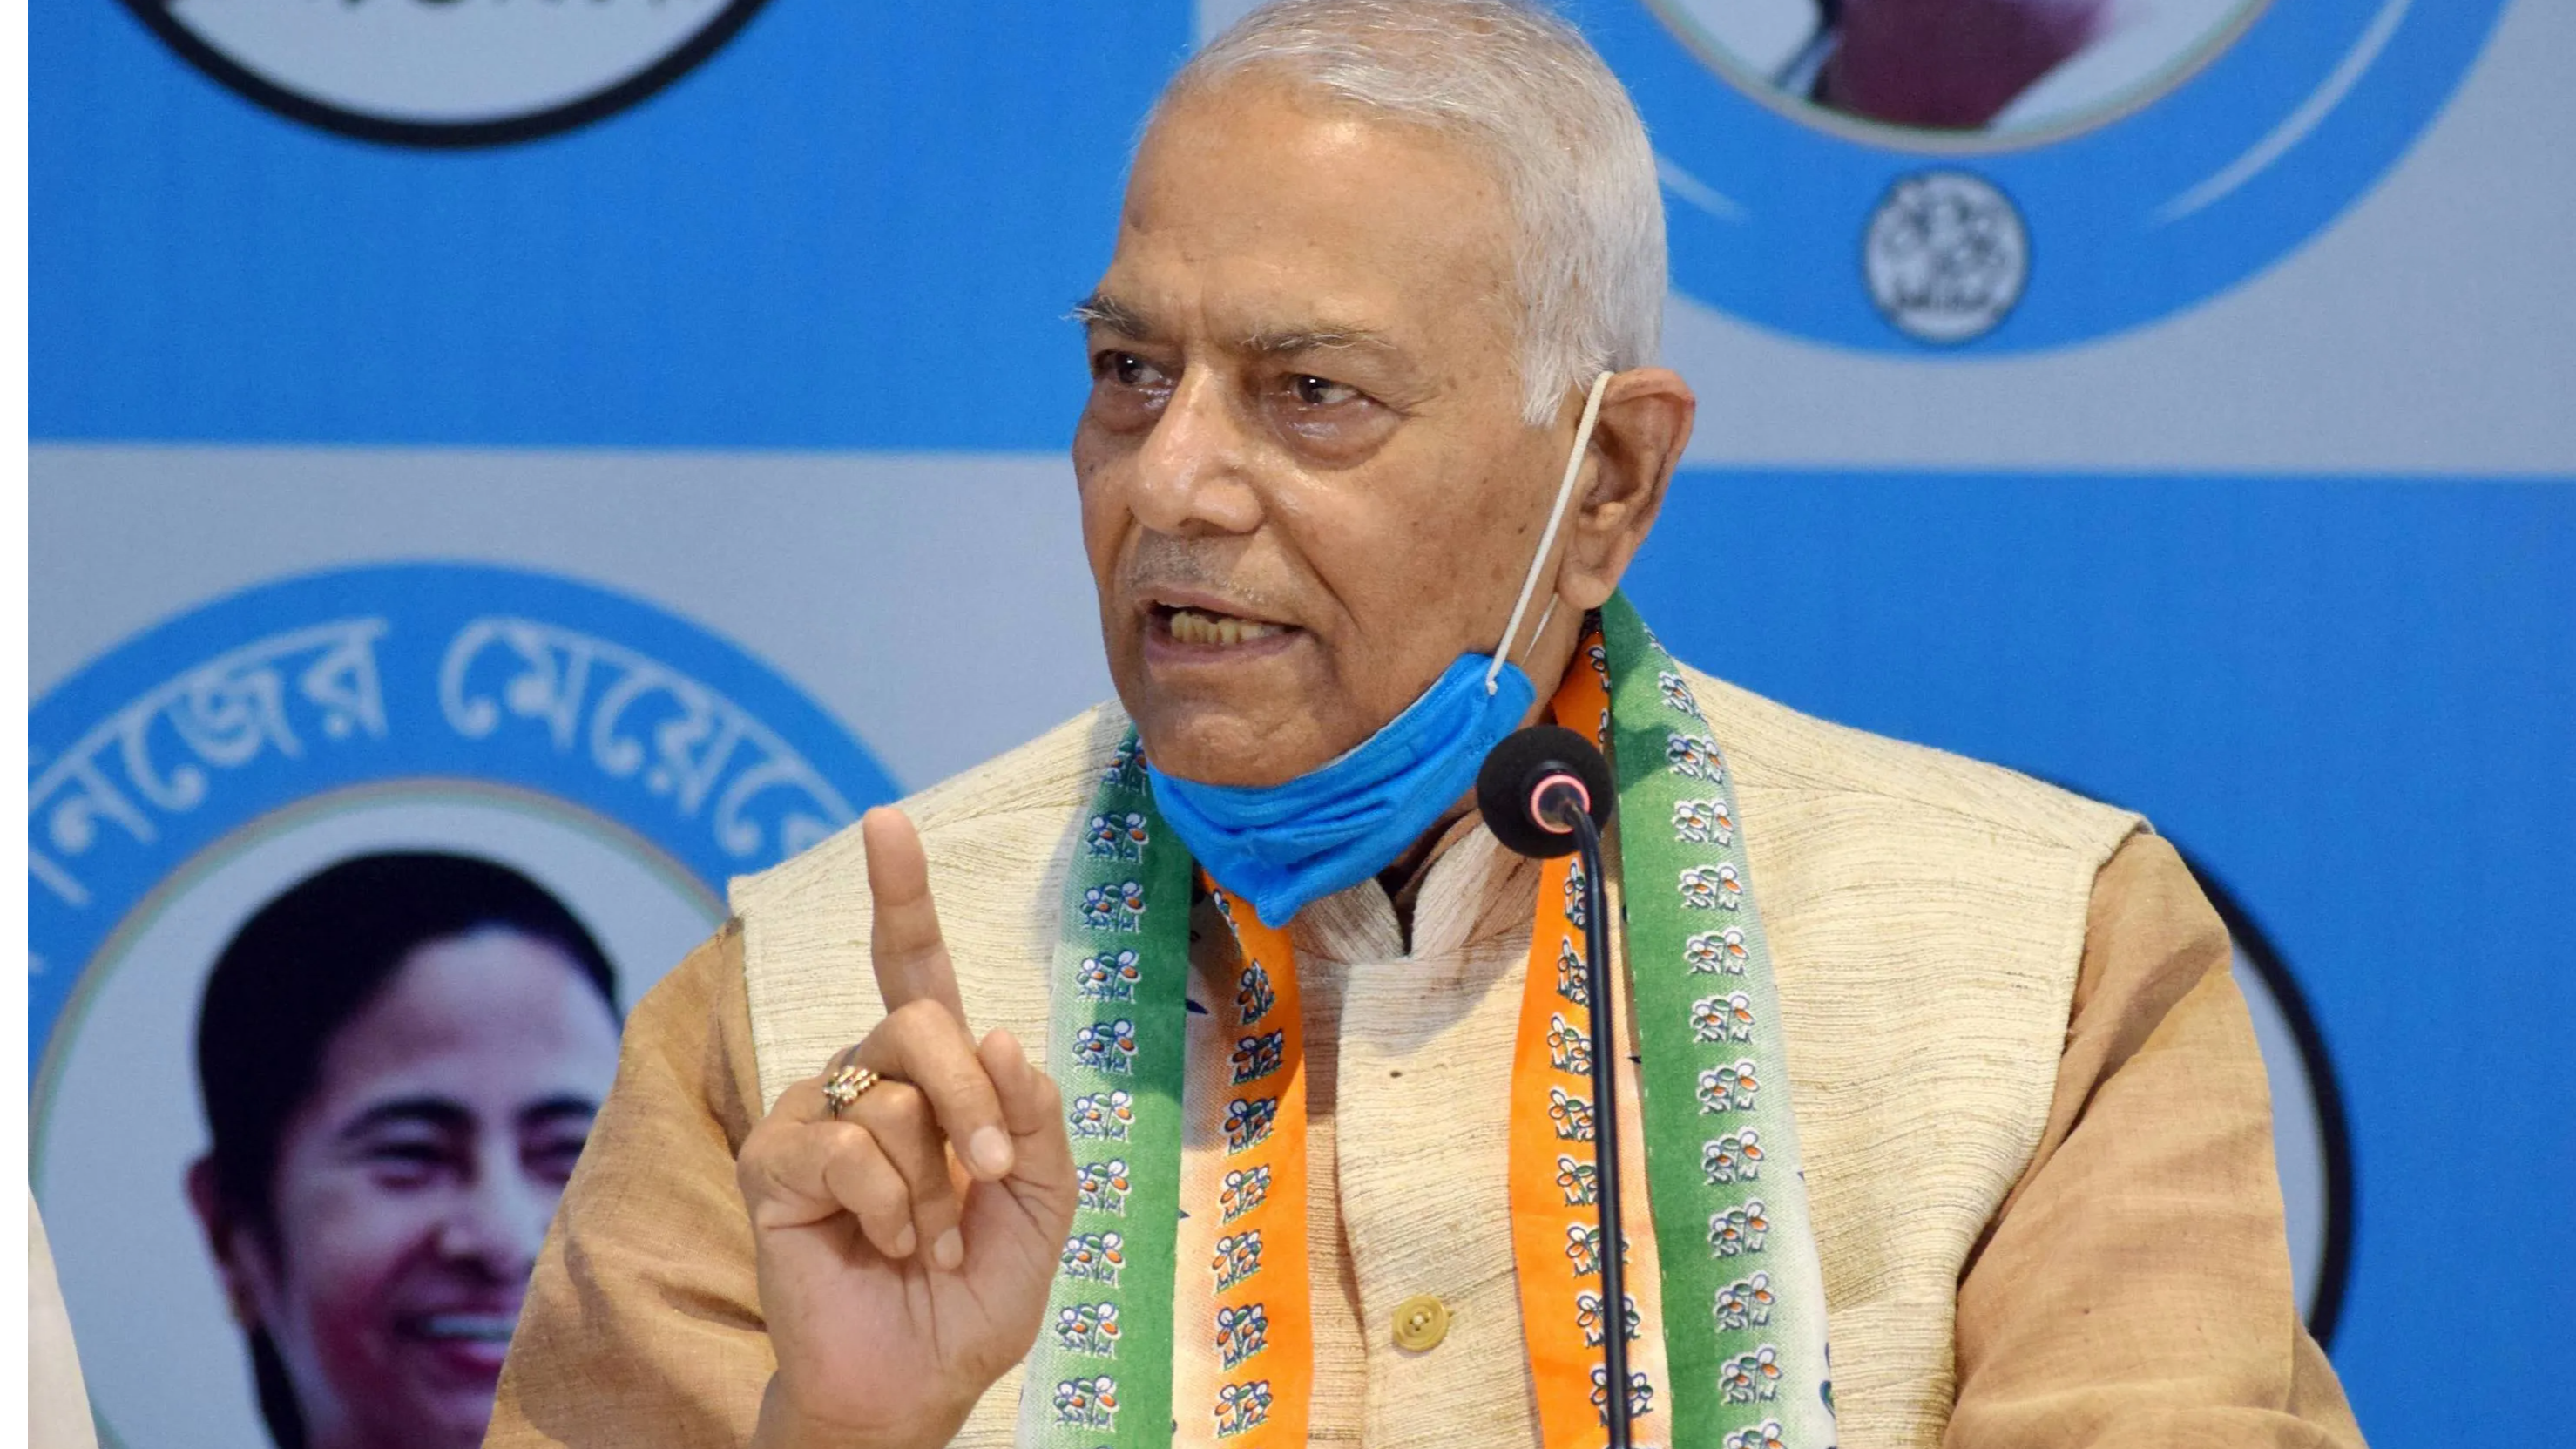 ‘Truly a world leader…’: Yashwant Sinha’s jibe at PM Modi over vaccine row